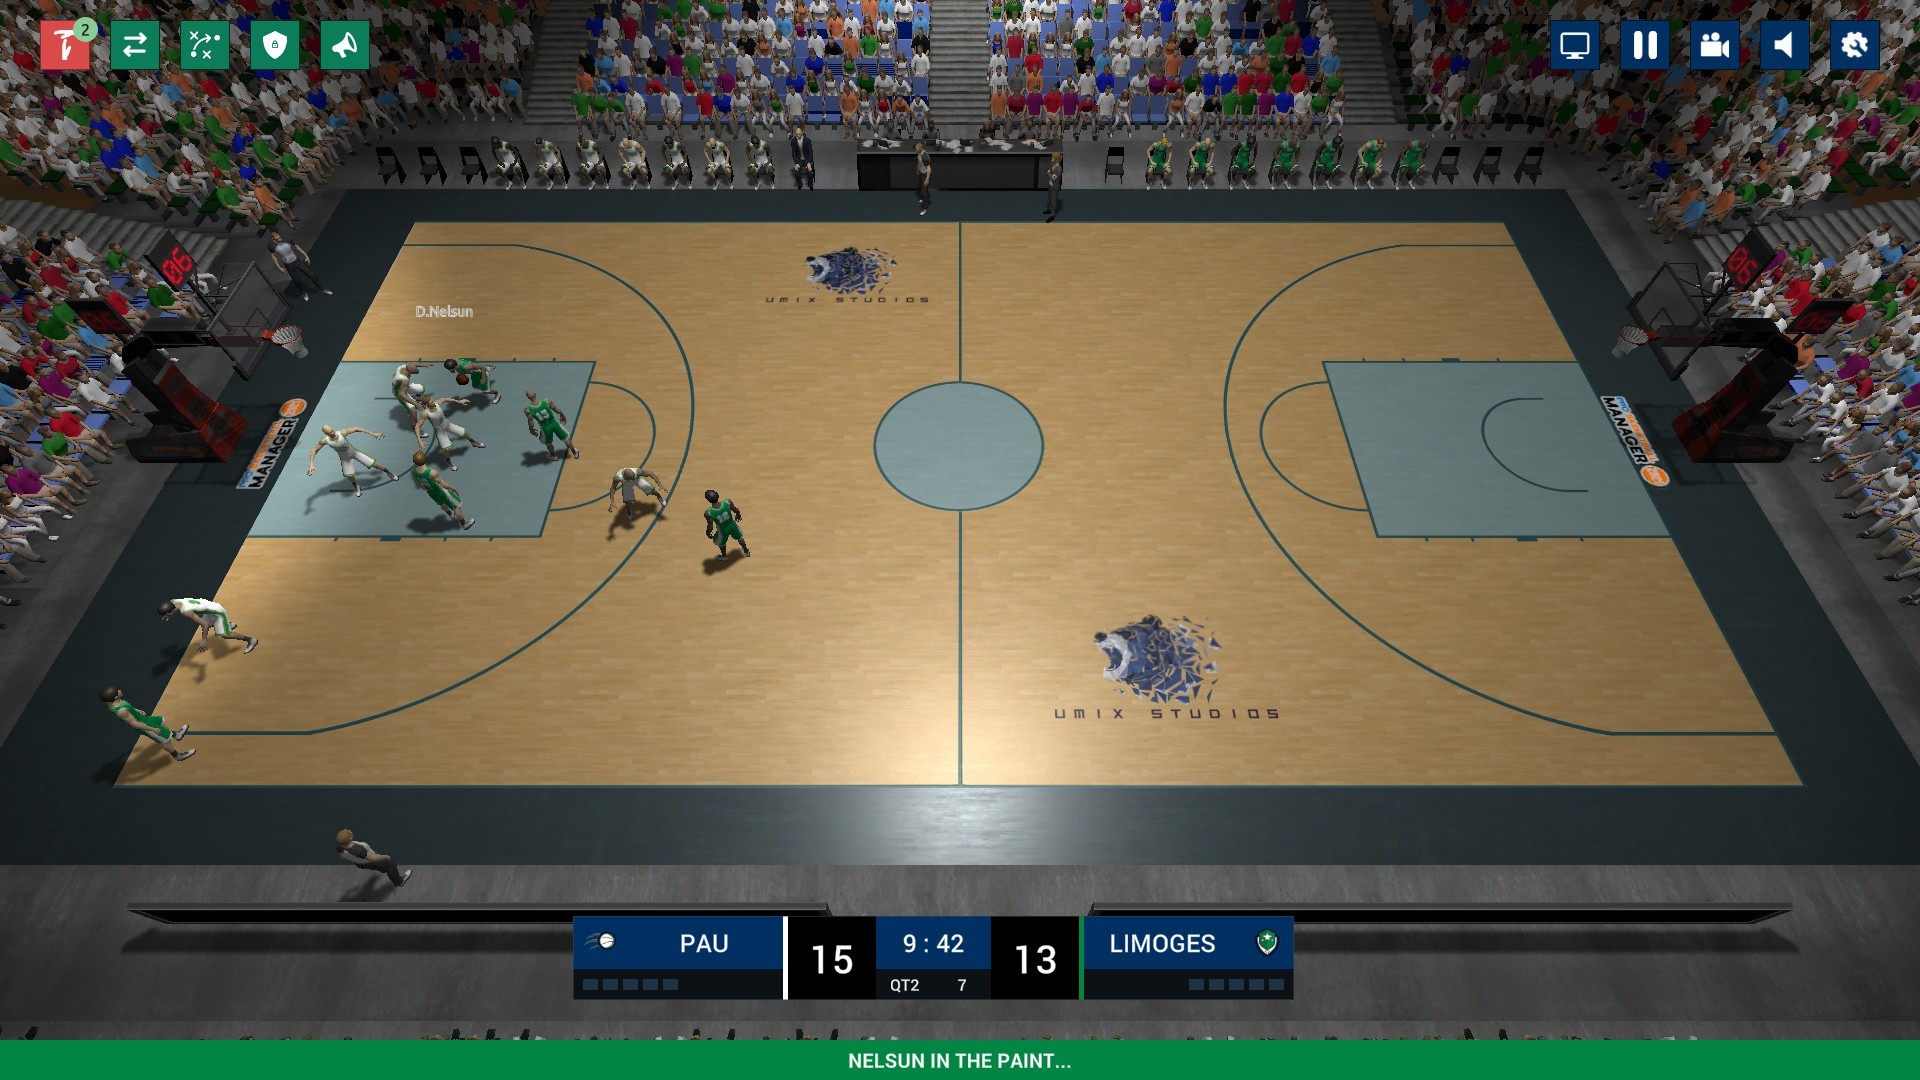 Pro Basketball Manager 2021 Free Download